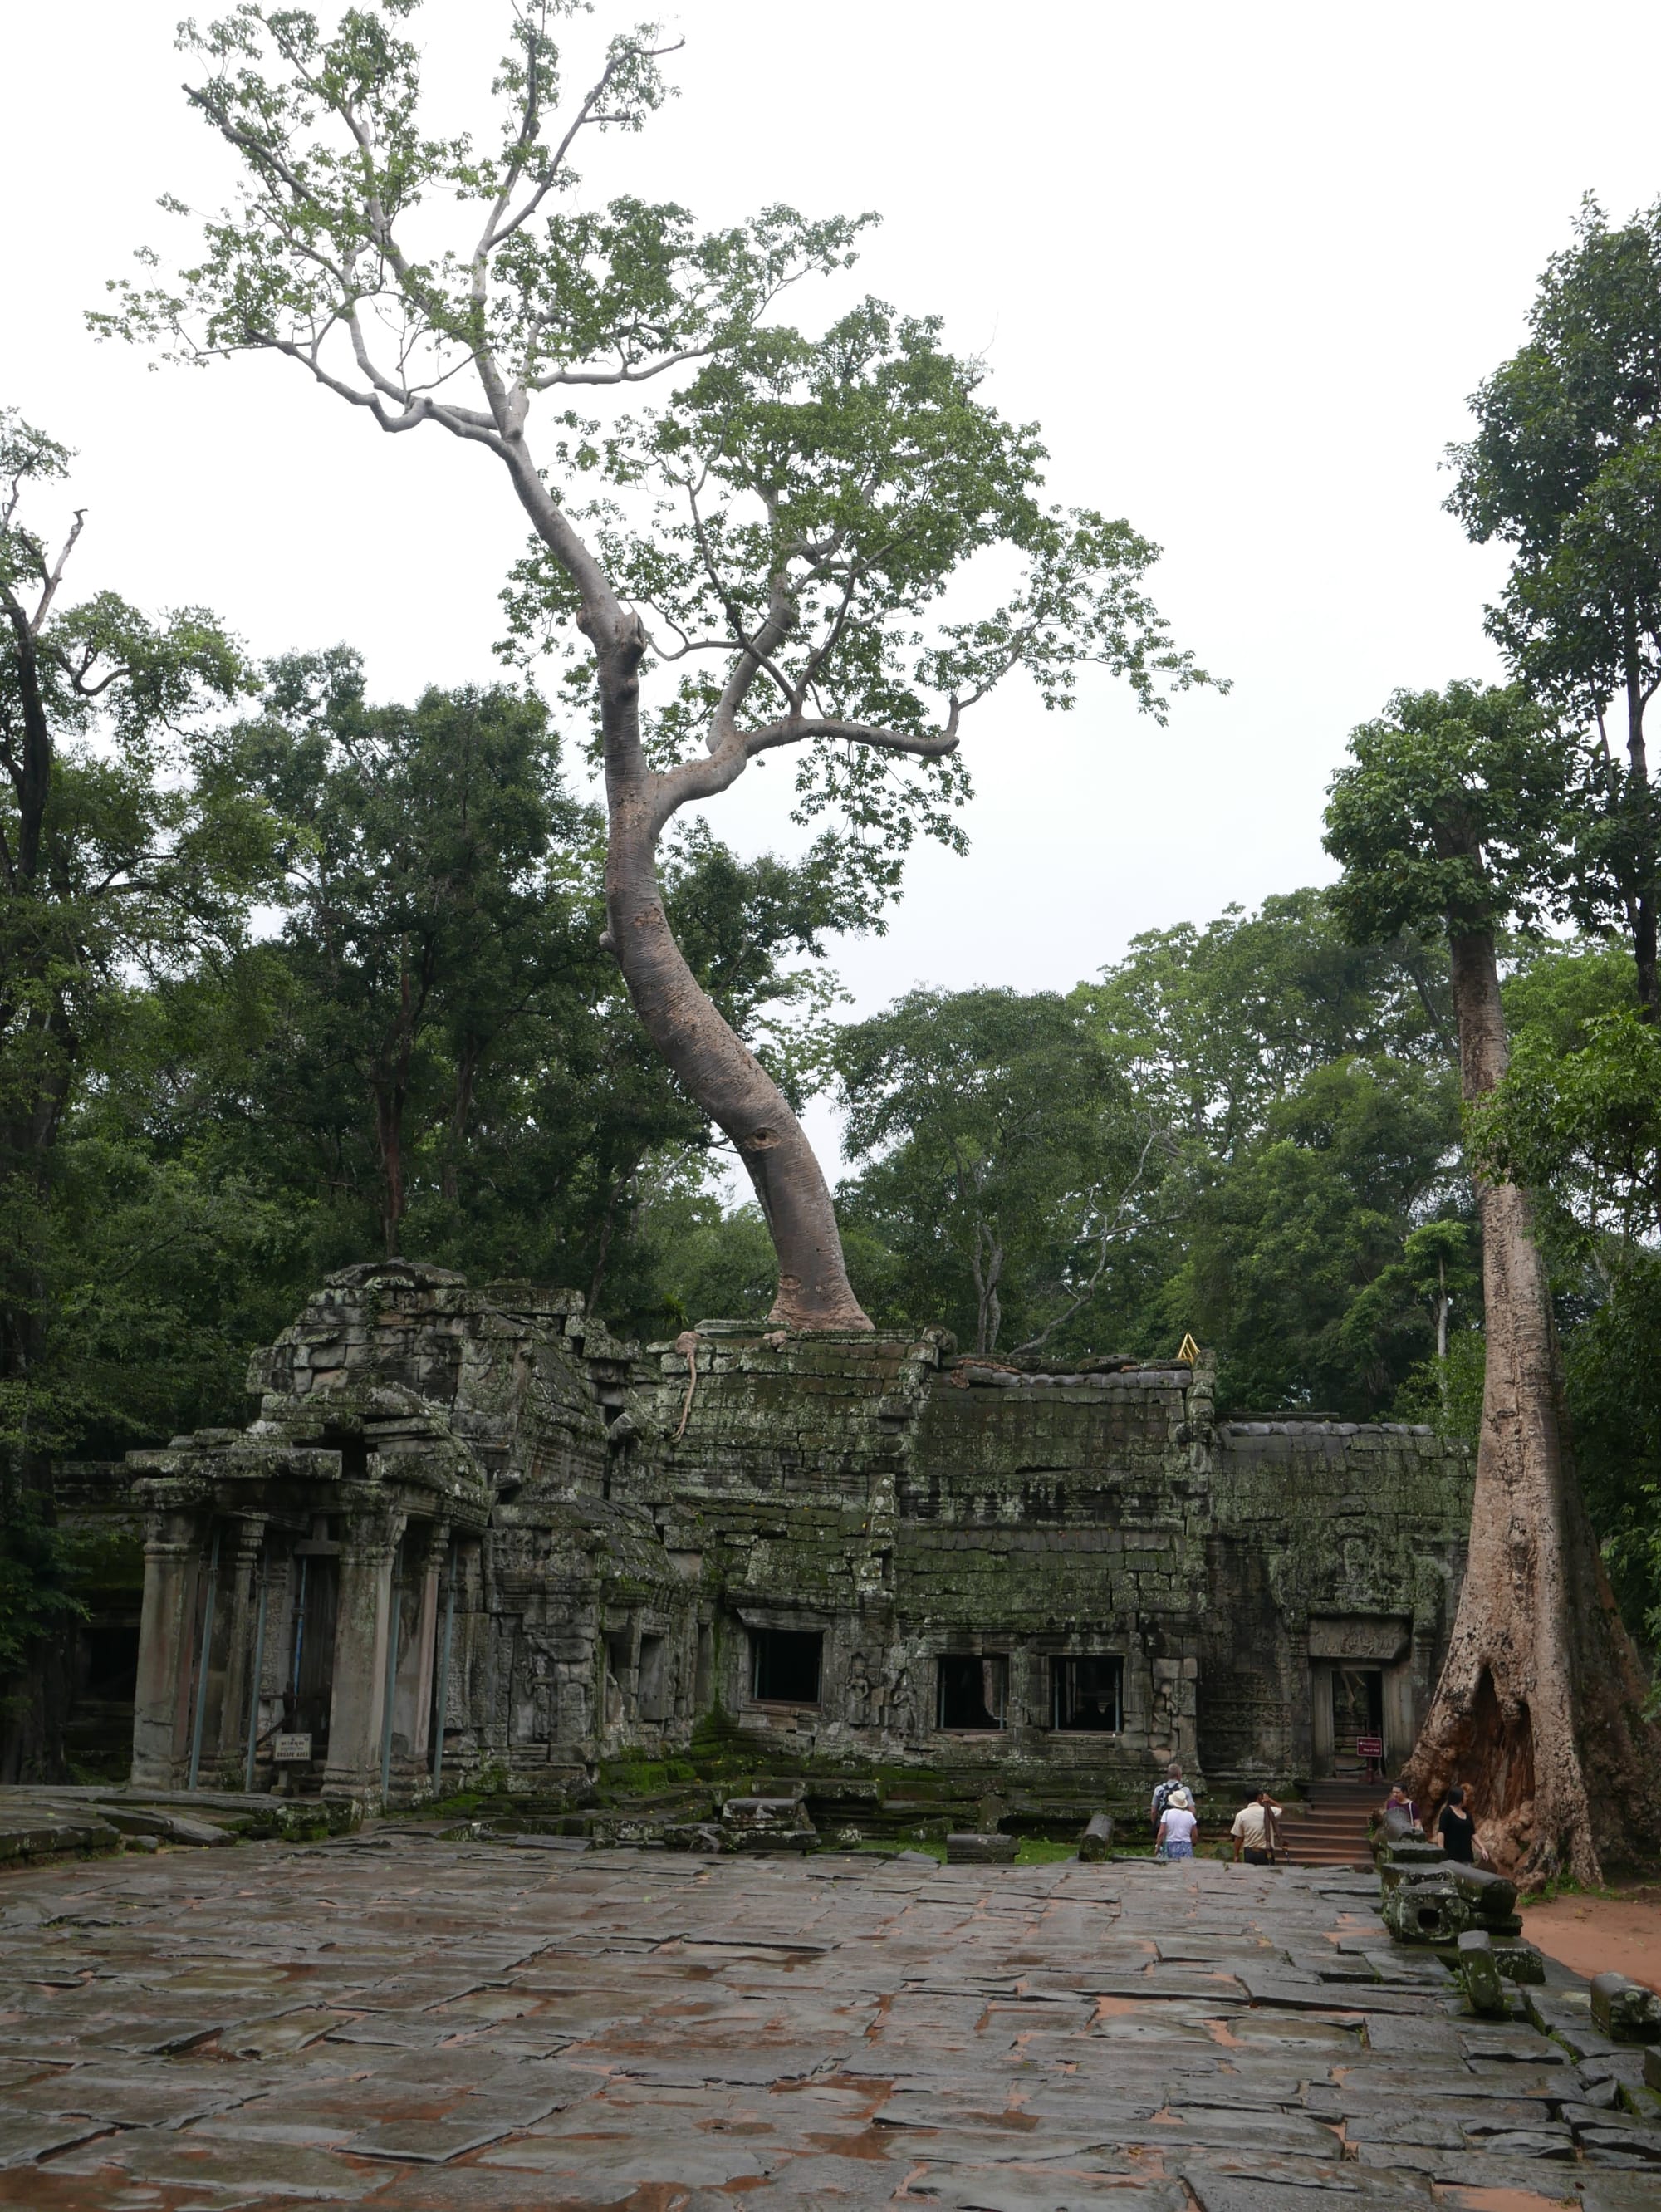 Photo by Author — main approach to — Ta Prohm (ប្រាសាទតាព្រហ្ម), Angkor Archaeological Park, Angkor, Cambodia — note the tree growing out and over the ruin